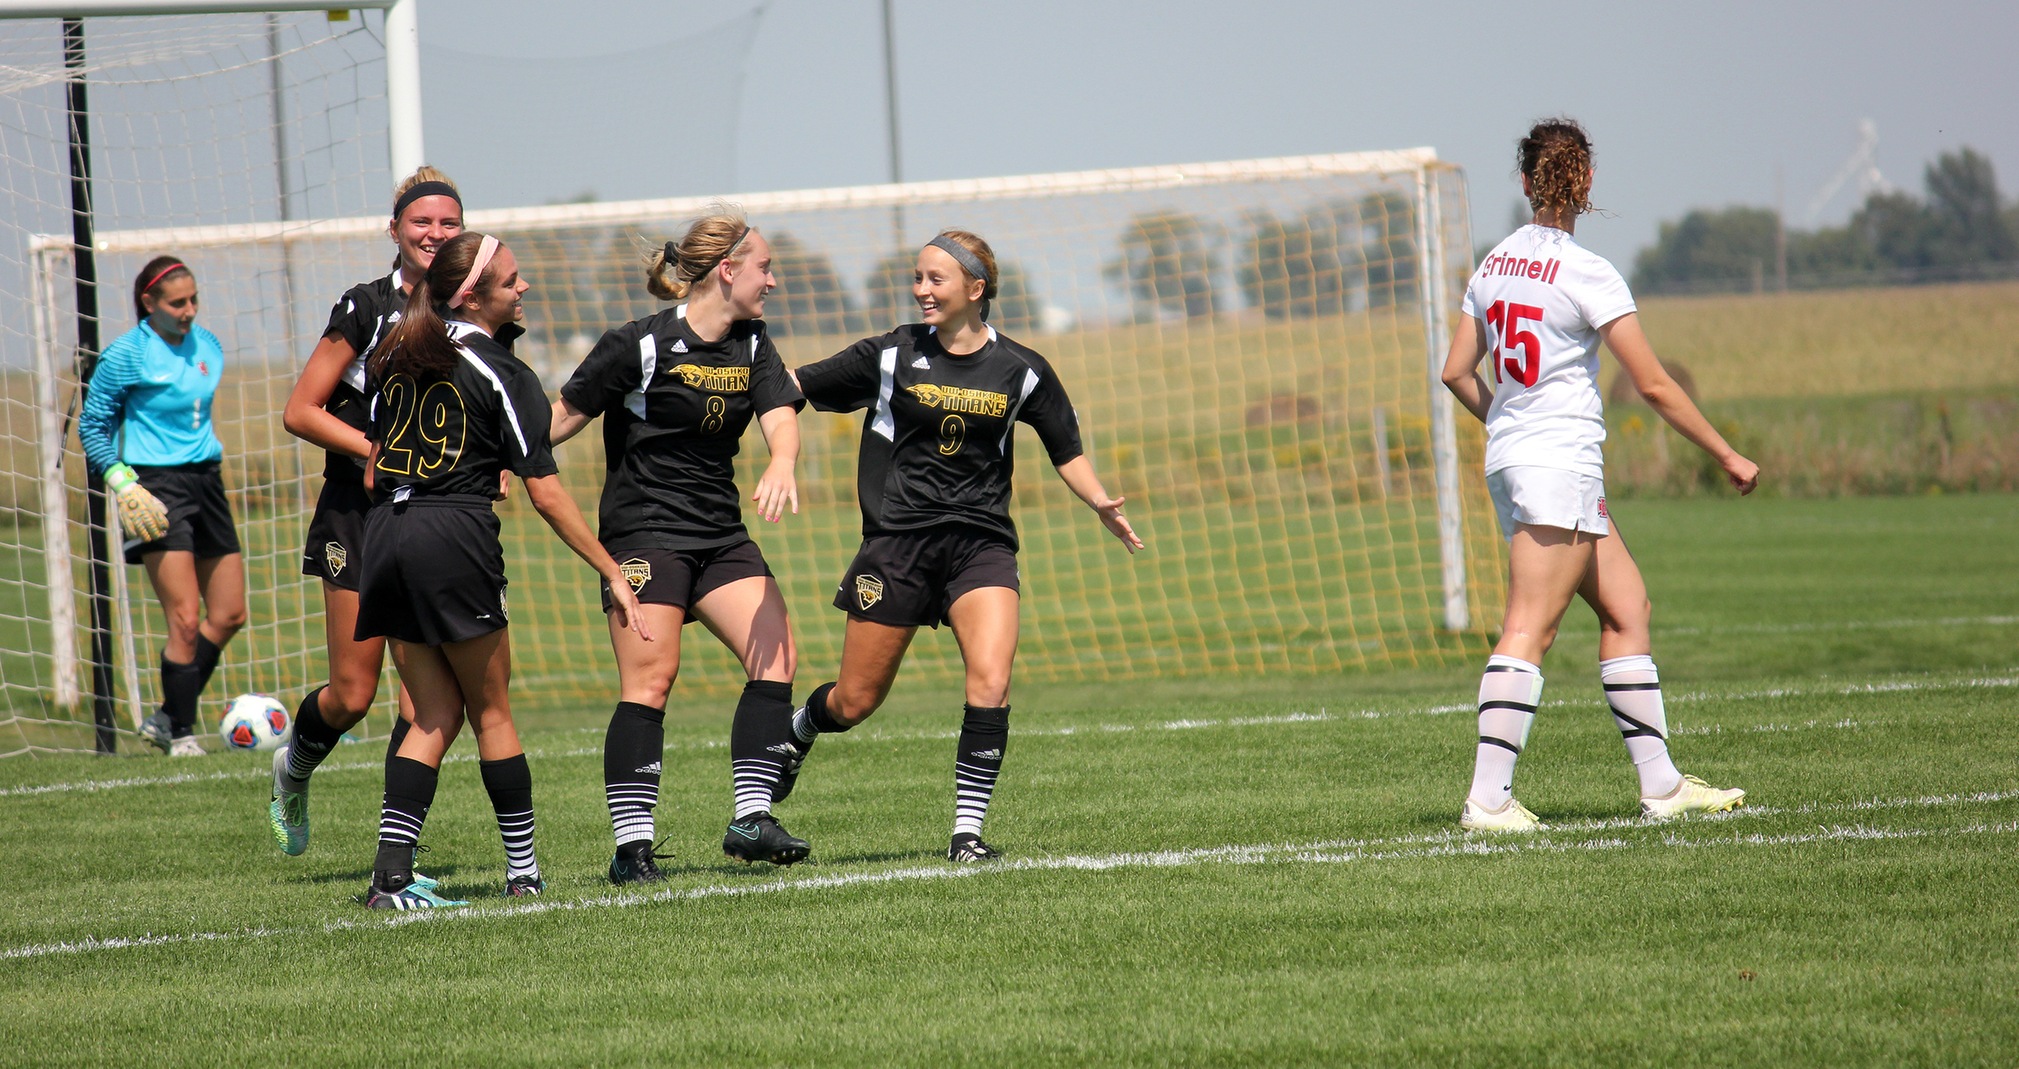 Kendra Jepson (8) is congratulated by her UW-Oshkosh teammates after scoring the match-winning goal.